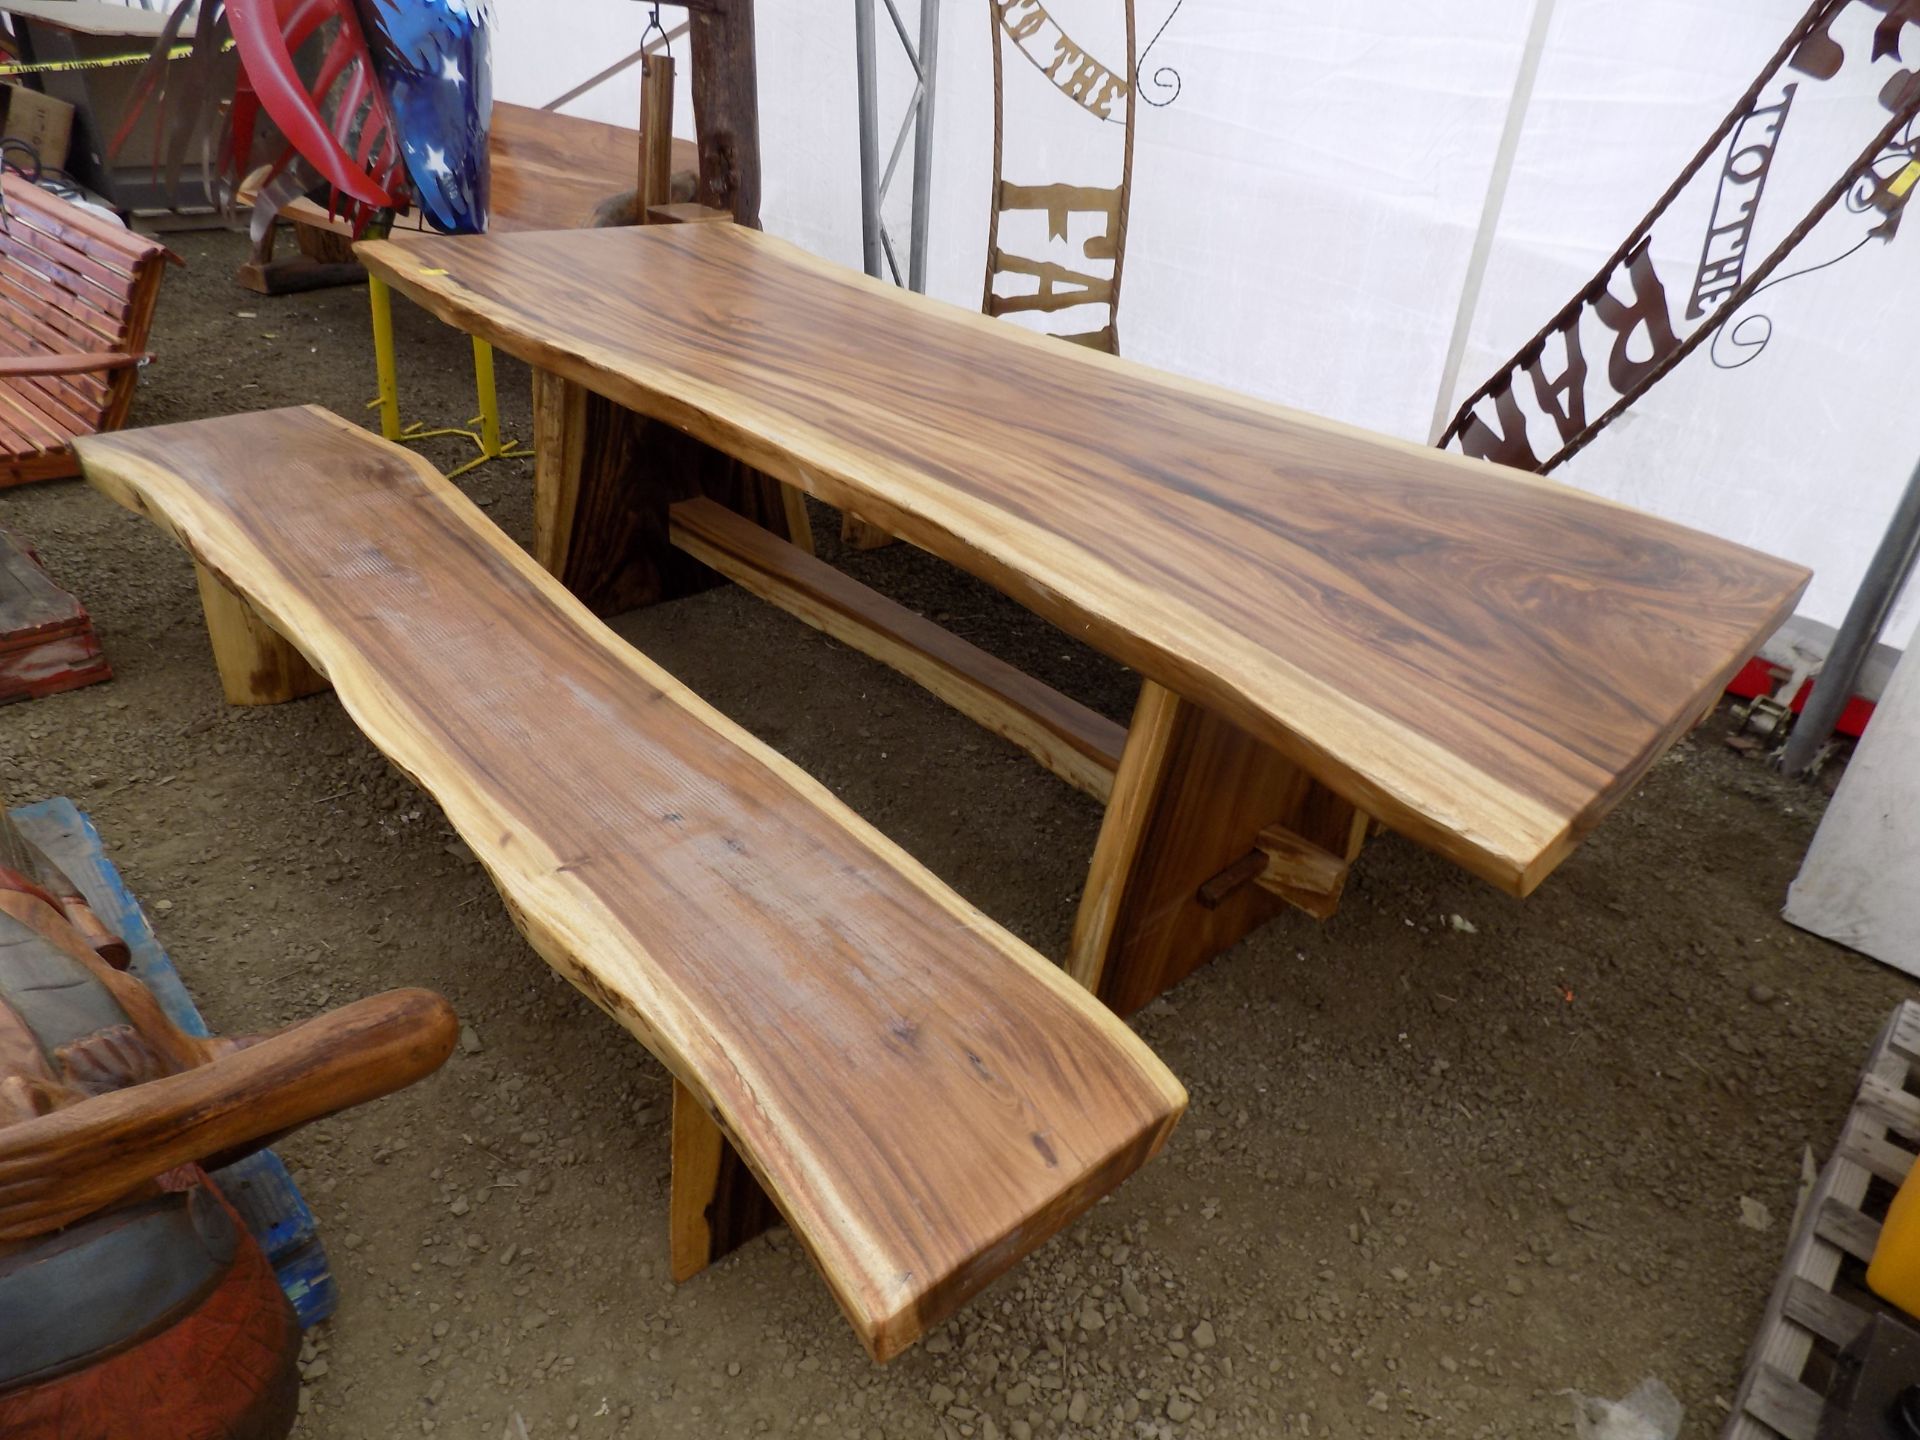 Slab Wood Rustic 9' Long Picnic Table w/2 Benches, 2-Tone Wood Grain - Image 2 of 2